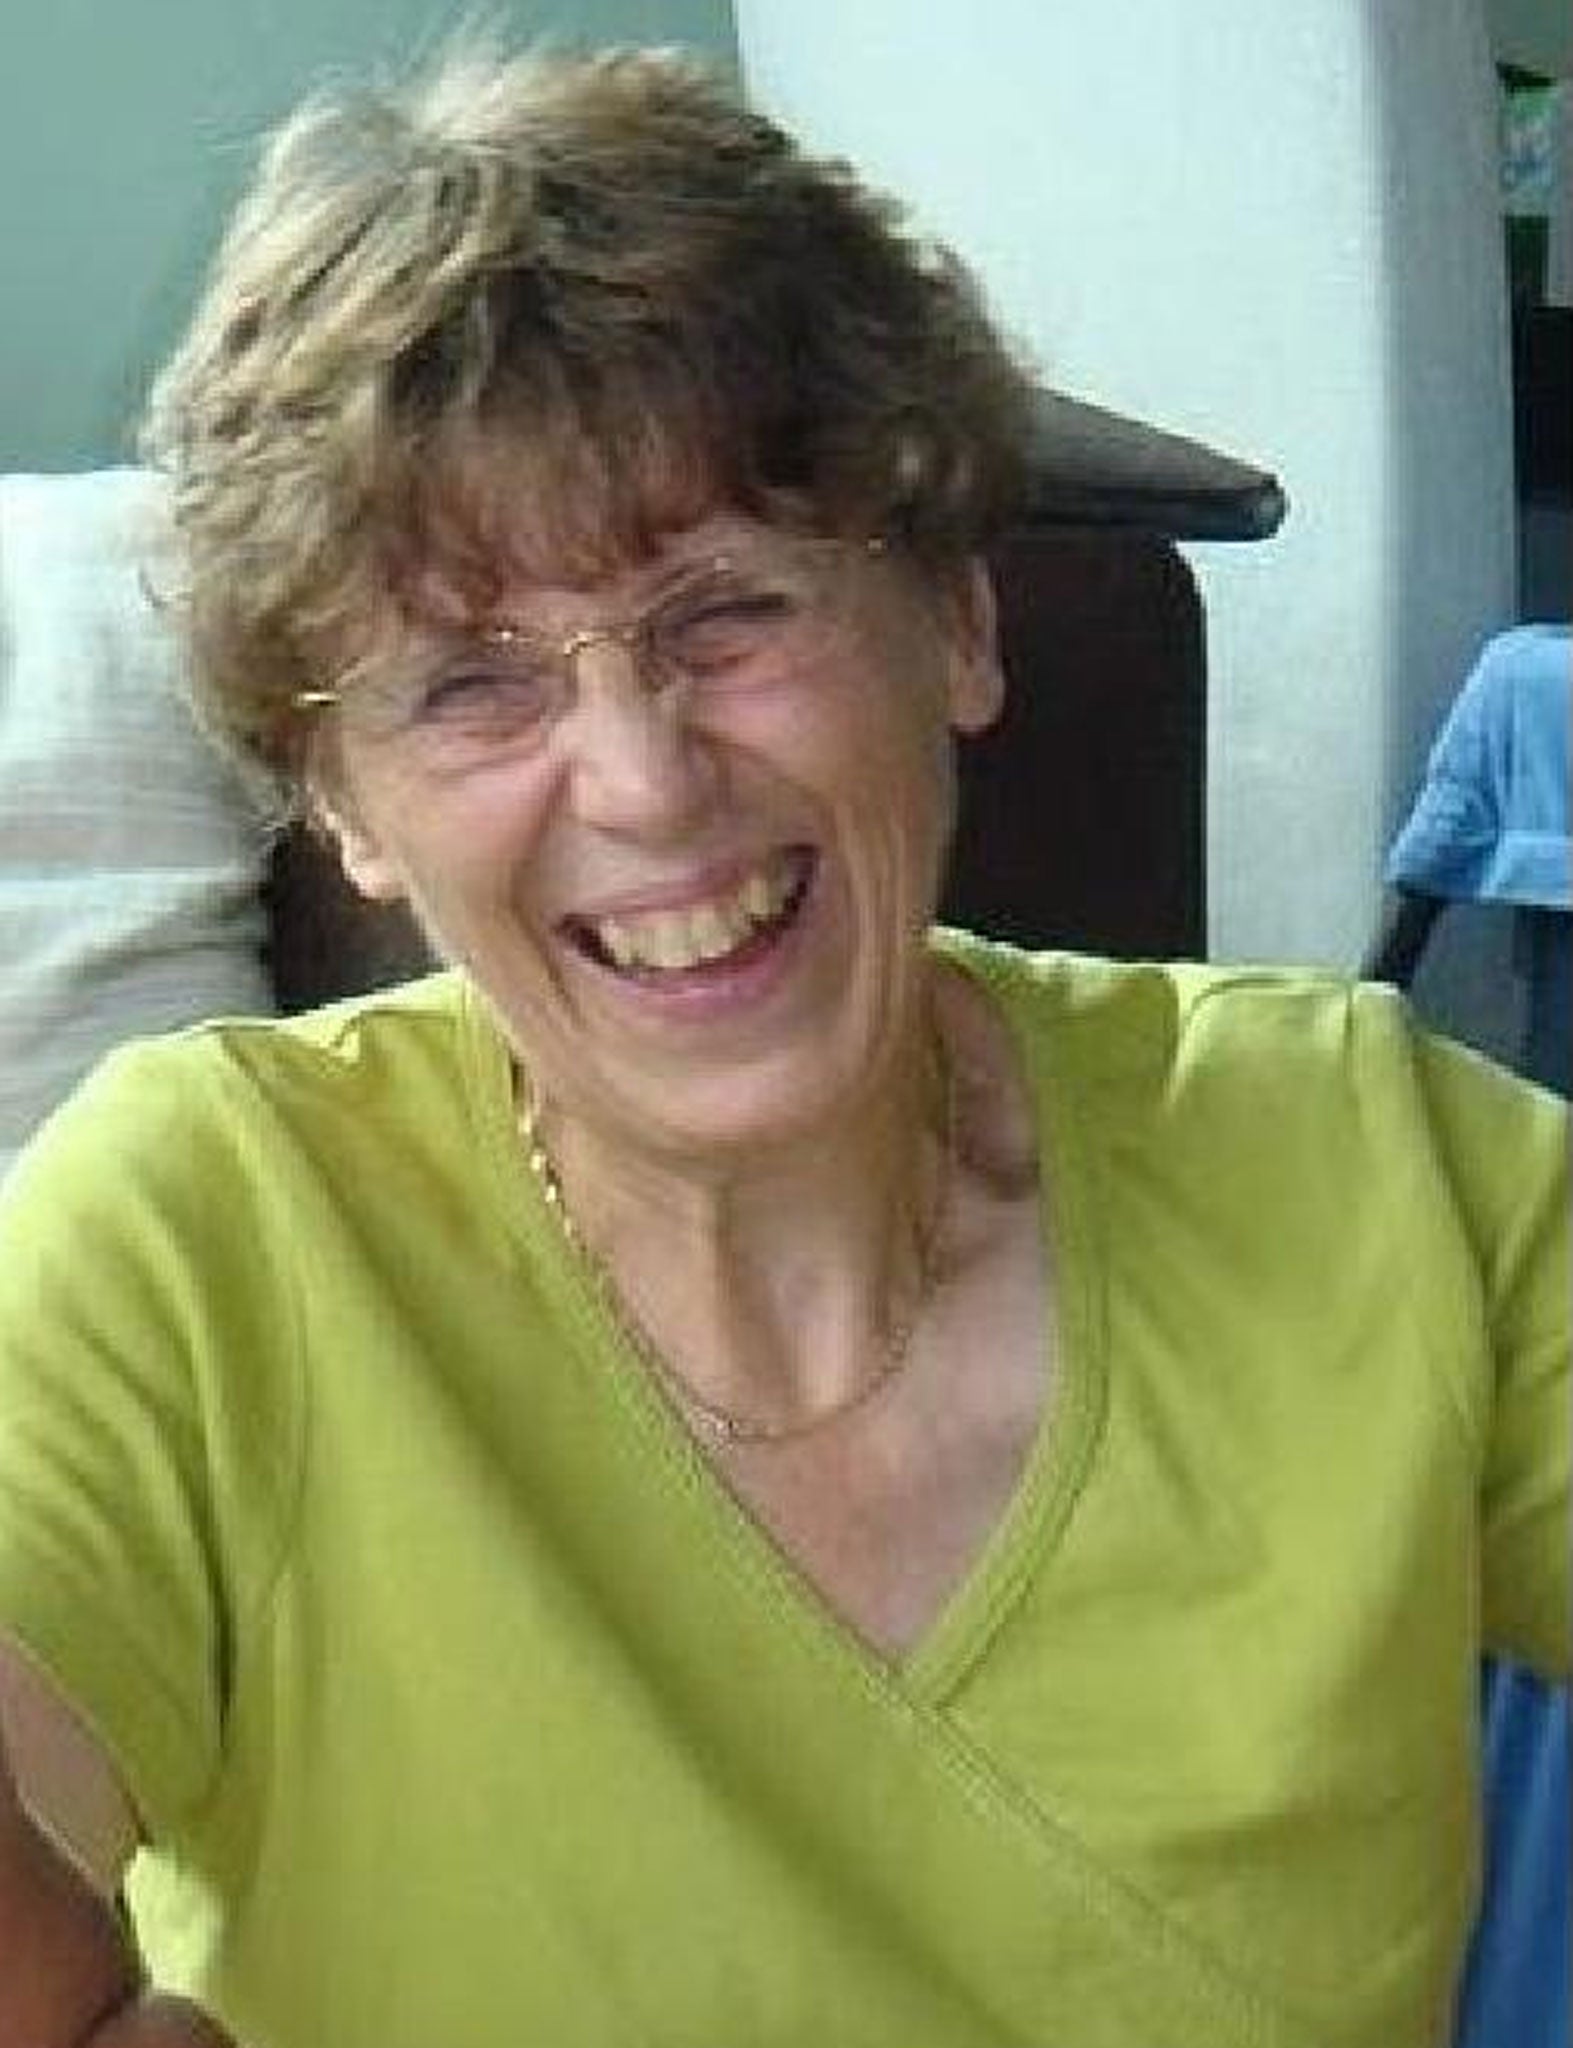 The body of Janet Gilson, 64, was found hidden under a sofa in Hong Kong